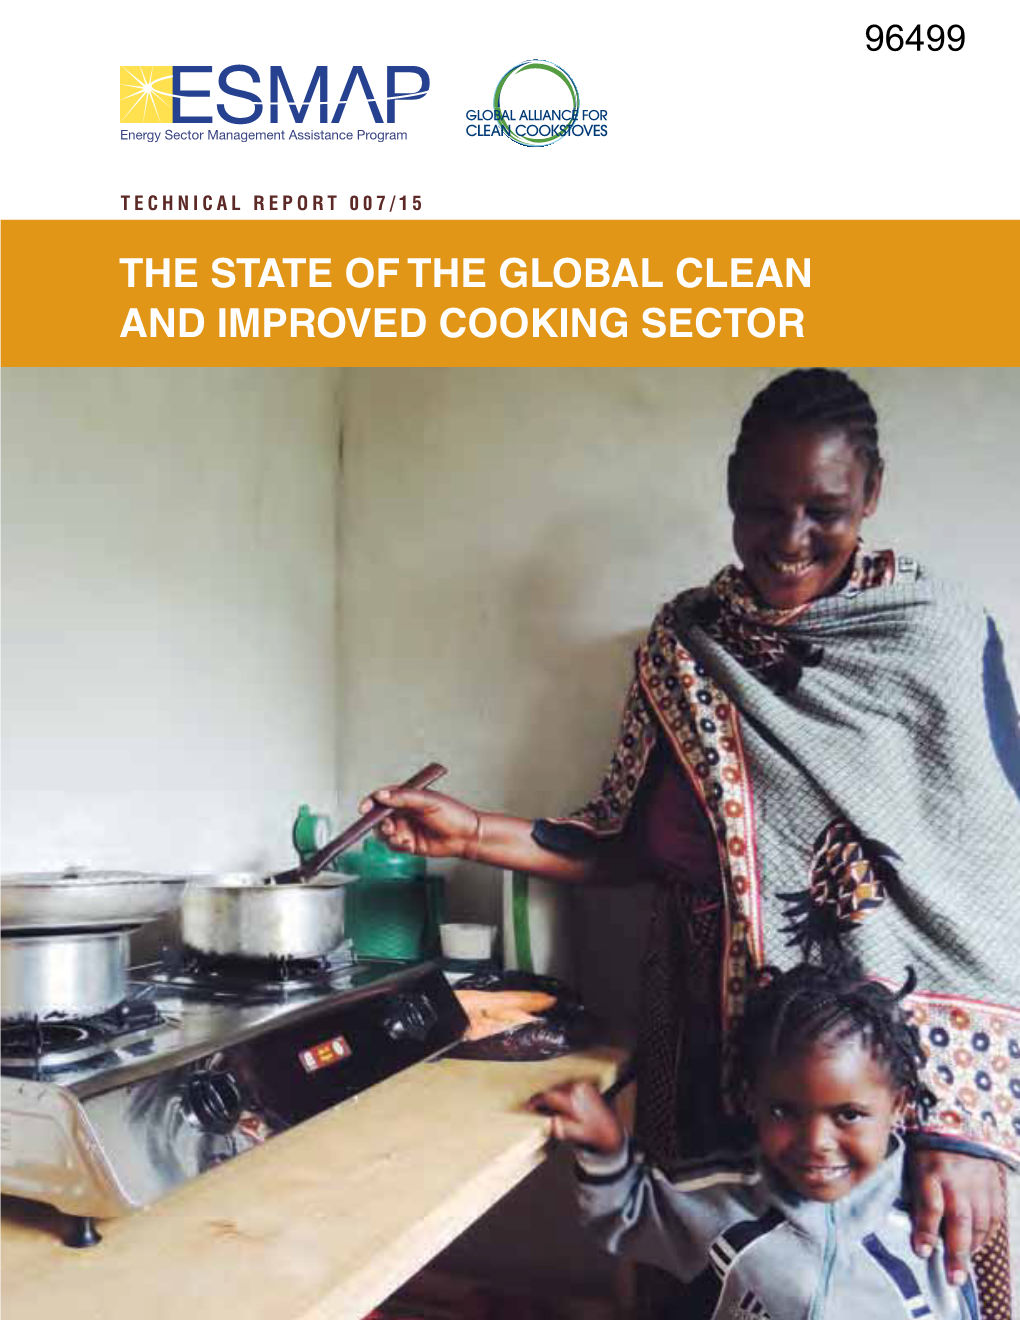 The State of the Global Clean and Improved Cooking Sector